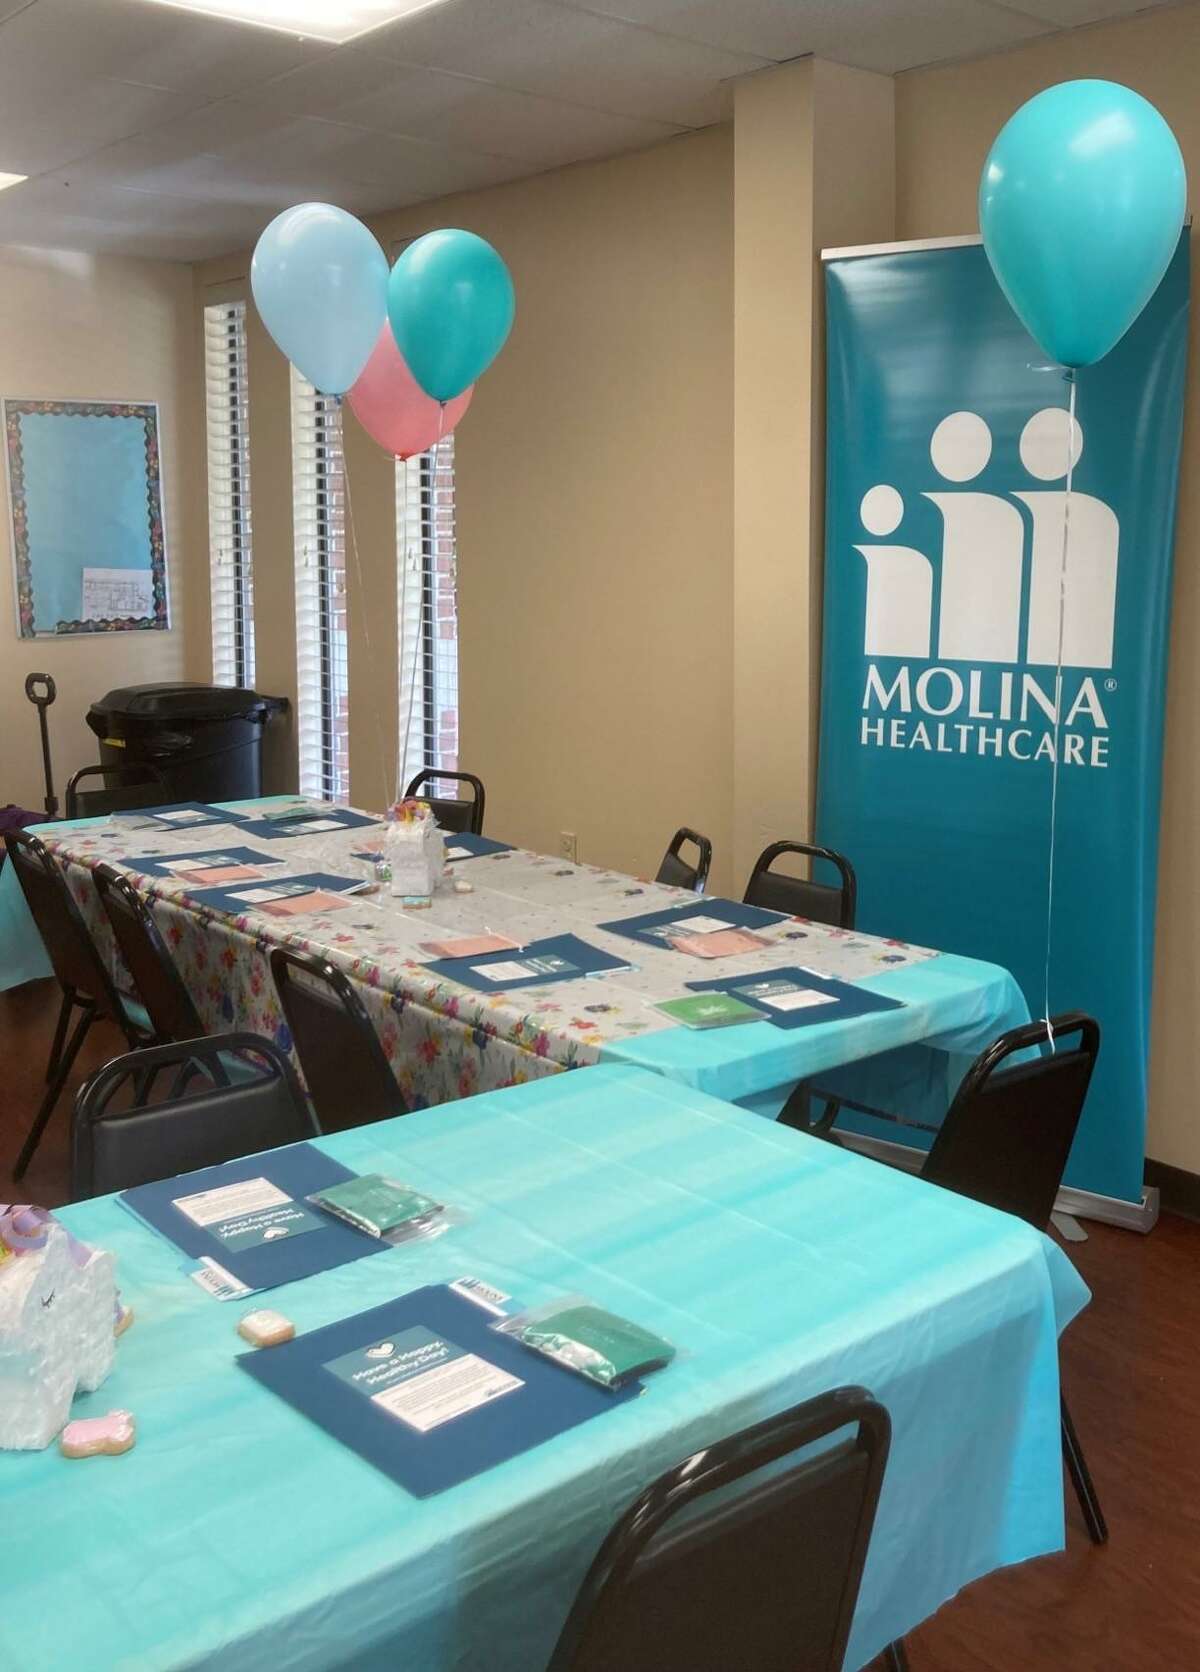 Spring Into Motherhood Community Baby Shower, was hosted by Taylor’s House of Hope on May 7 at Anointed Faith Family Church in Tomball.